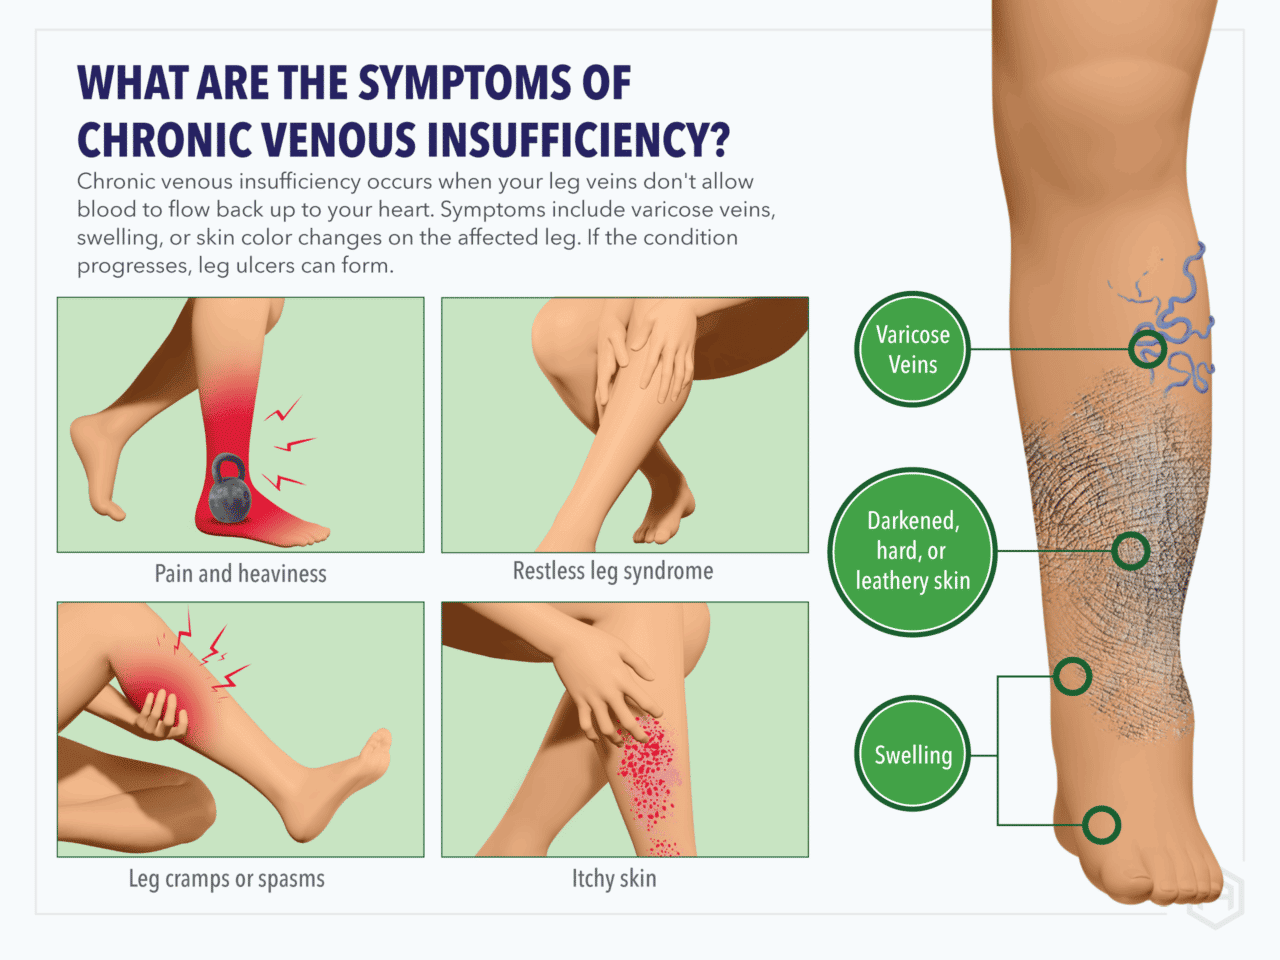 Skin changes associated with chronic venous insufficiency (CVI